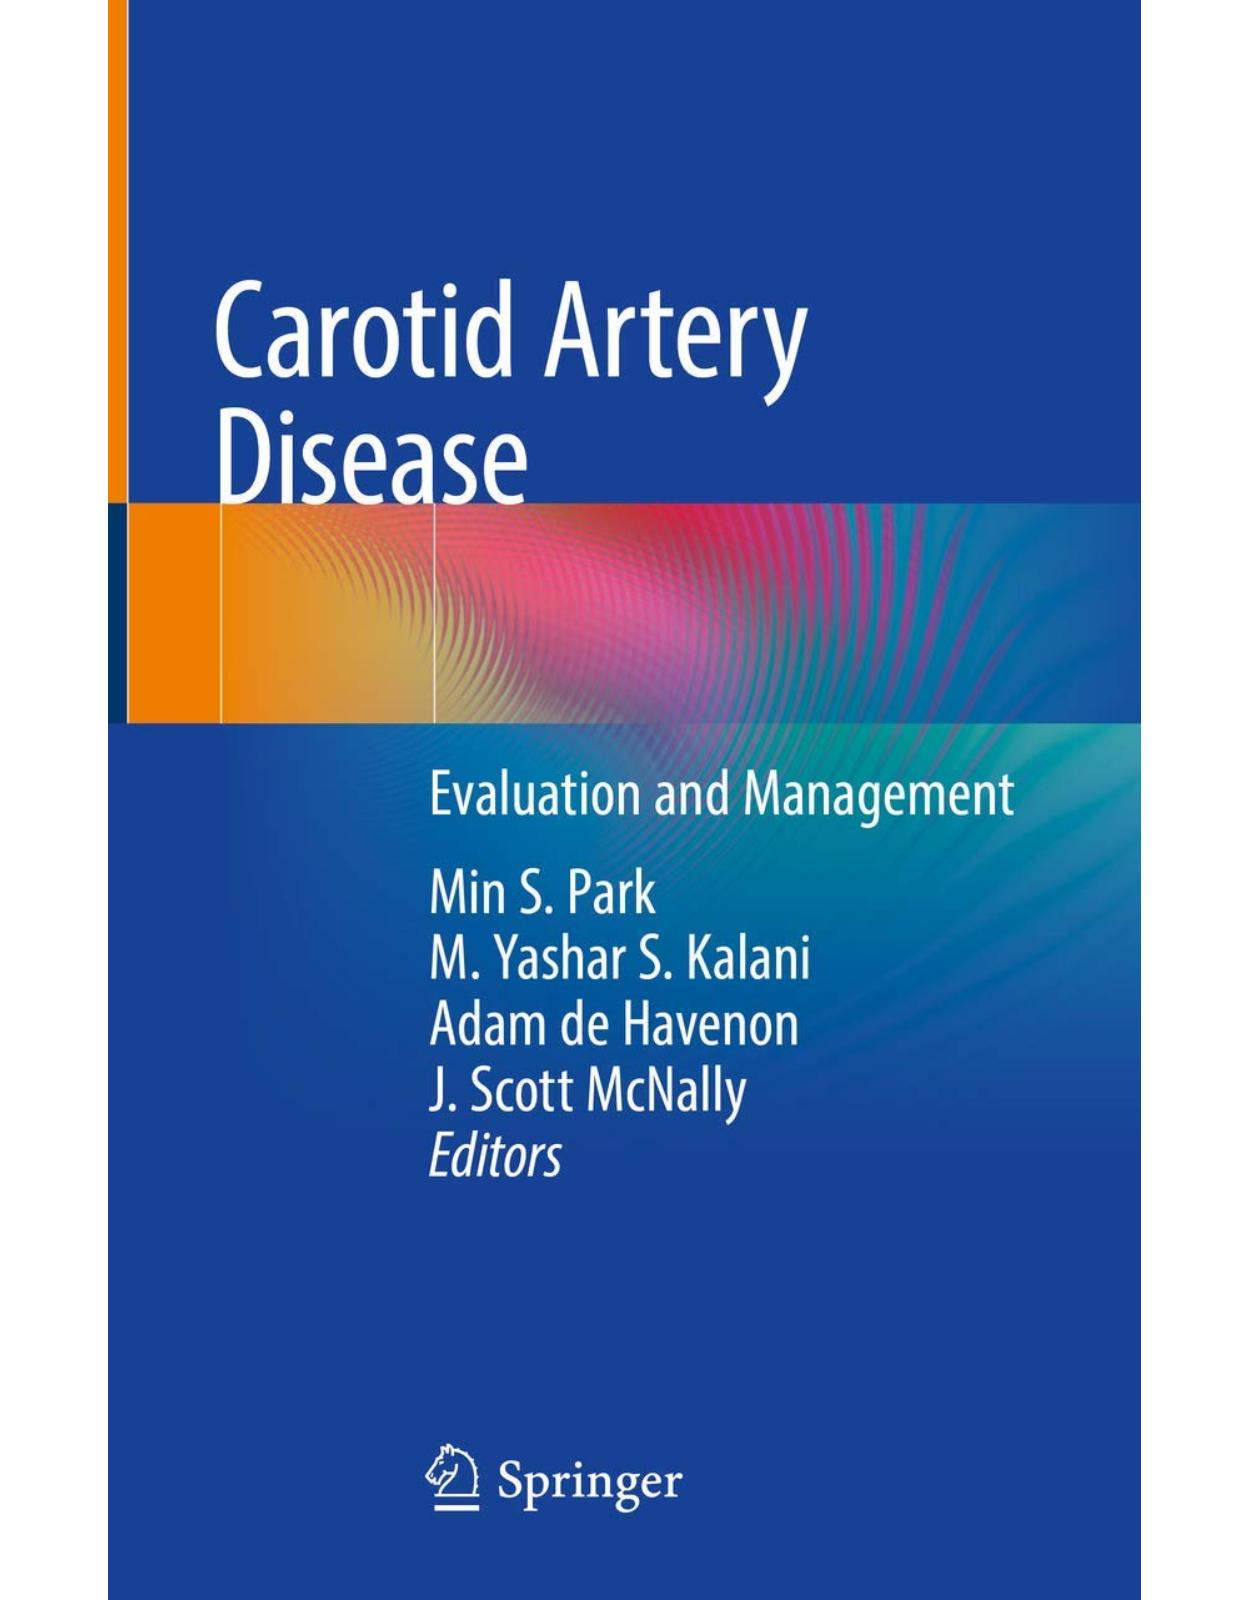 Carotid Artery Disease: Evaluation and Management